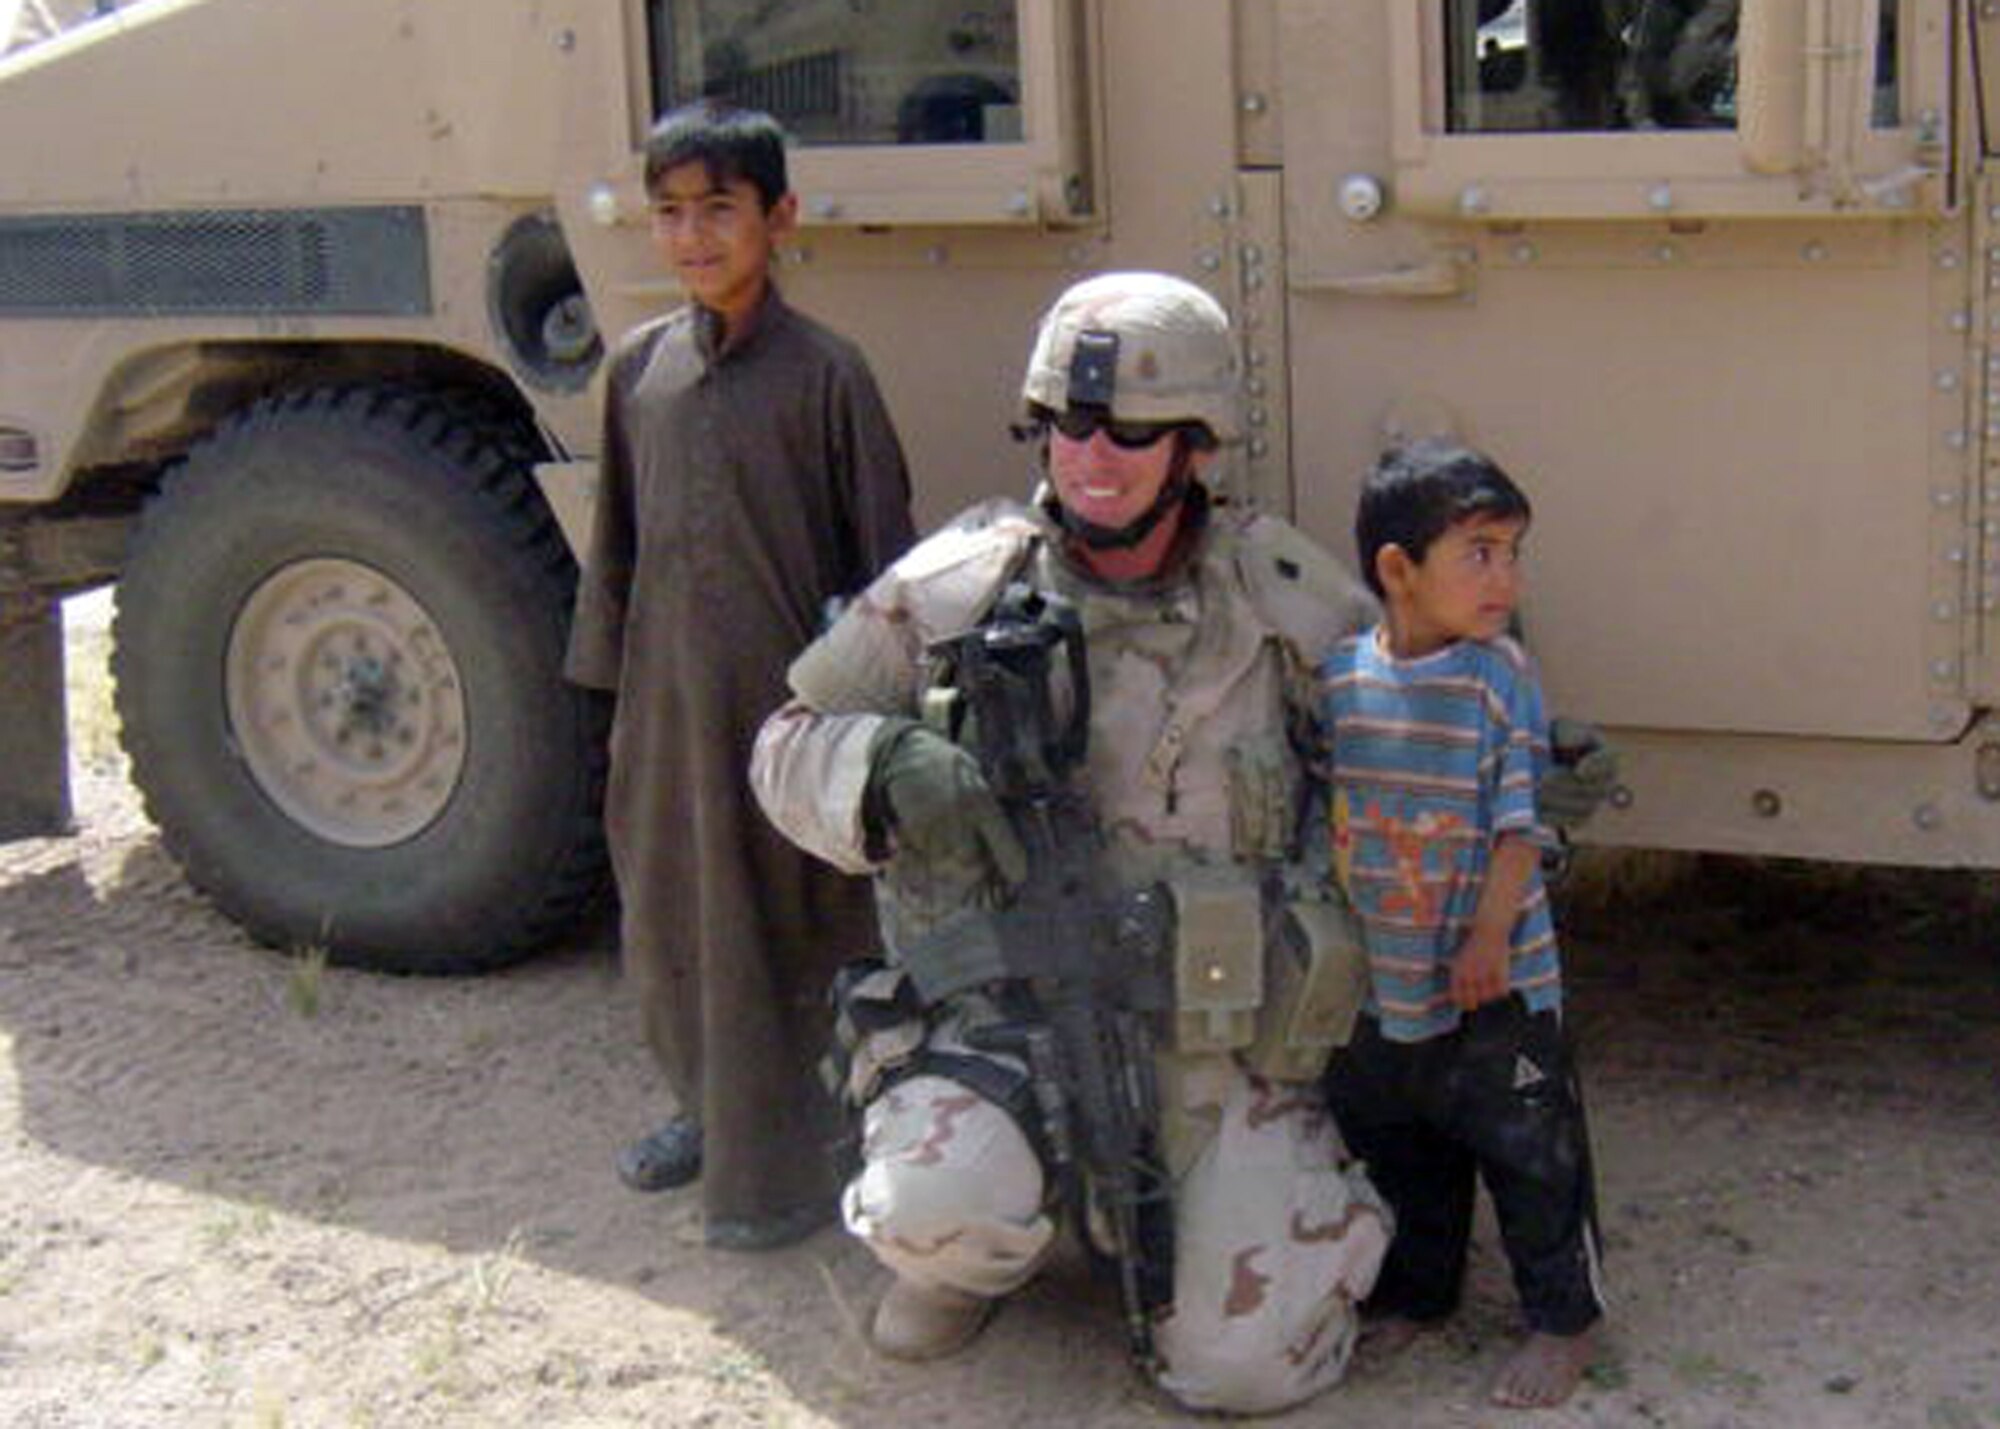 SOUTHWEST ASIA -- Under a very watchful eye from his team, Tech. Sgt. Trevor Dunn poses with some local children during a deployment to Southwest Asia. Sergeant Dunn recently won the Air Force Space Command Security Forces Individual Award for Outstanding Security Forces Support Staff Non-Commissioned Officer. (Courtesy photo)          